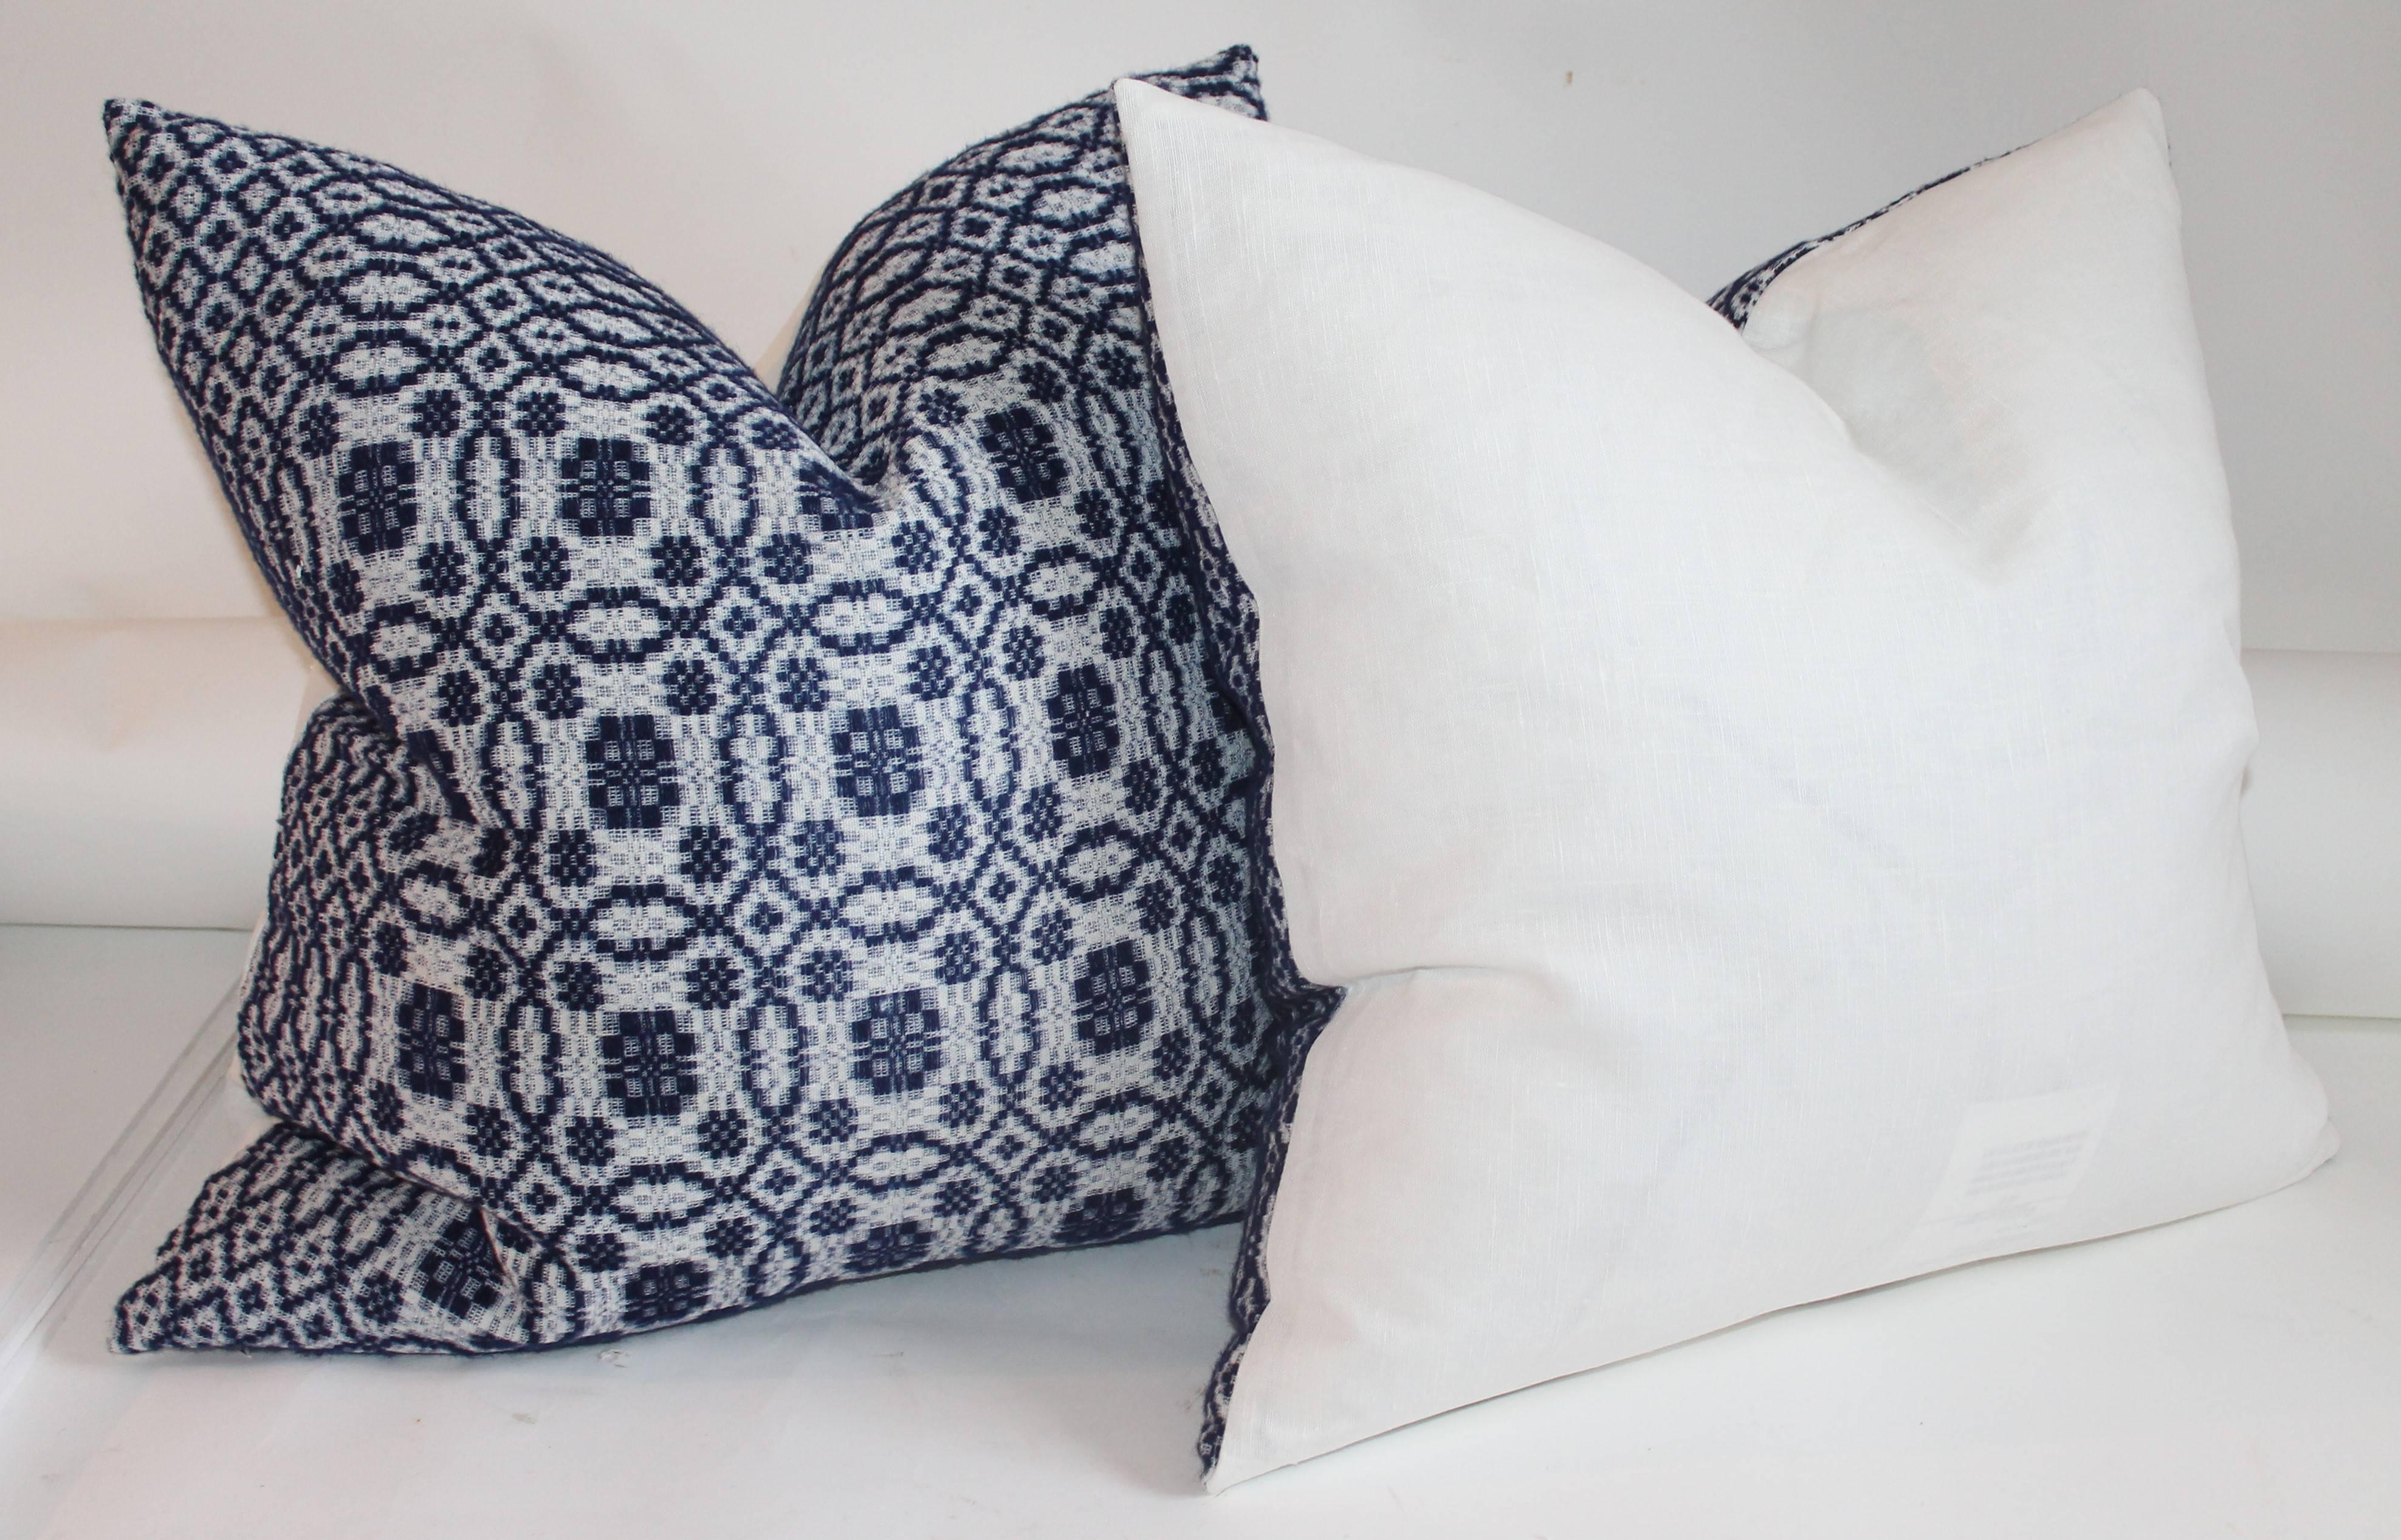 These handwoven coverlet pillows are in deep blue and white and have white linen backings. The condition are pristine. Three pairs in stock.